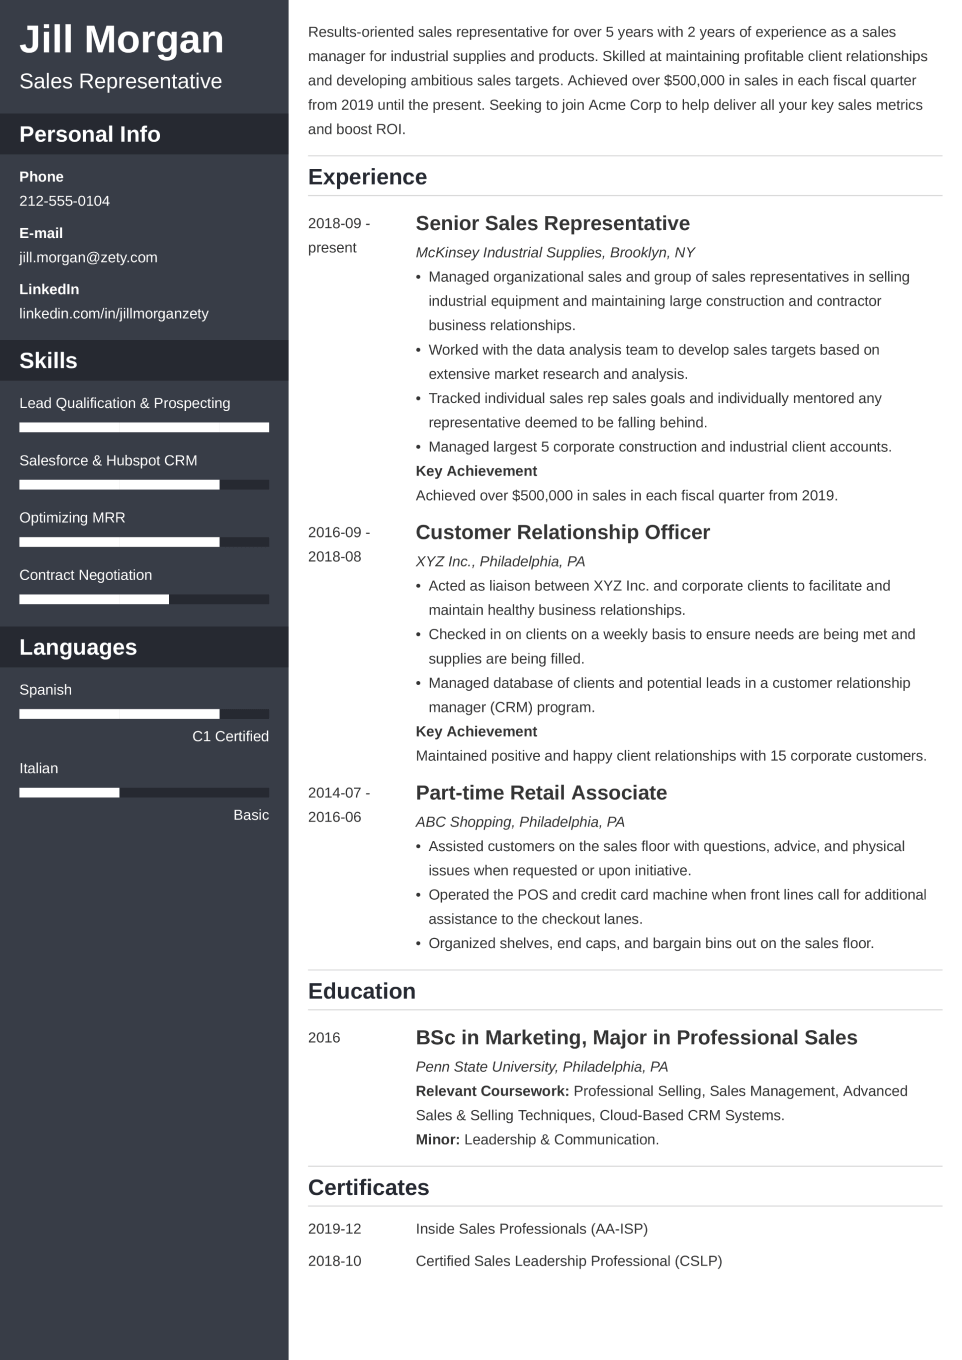 Professional Cv Help from cdn-images.zety.com